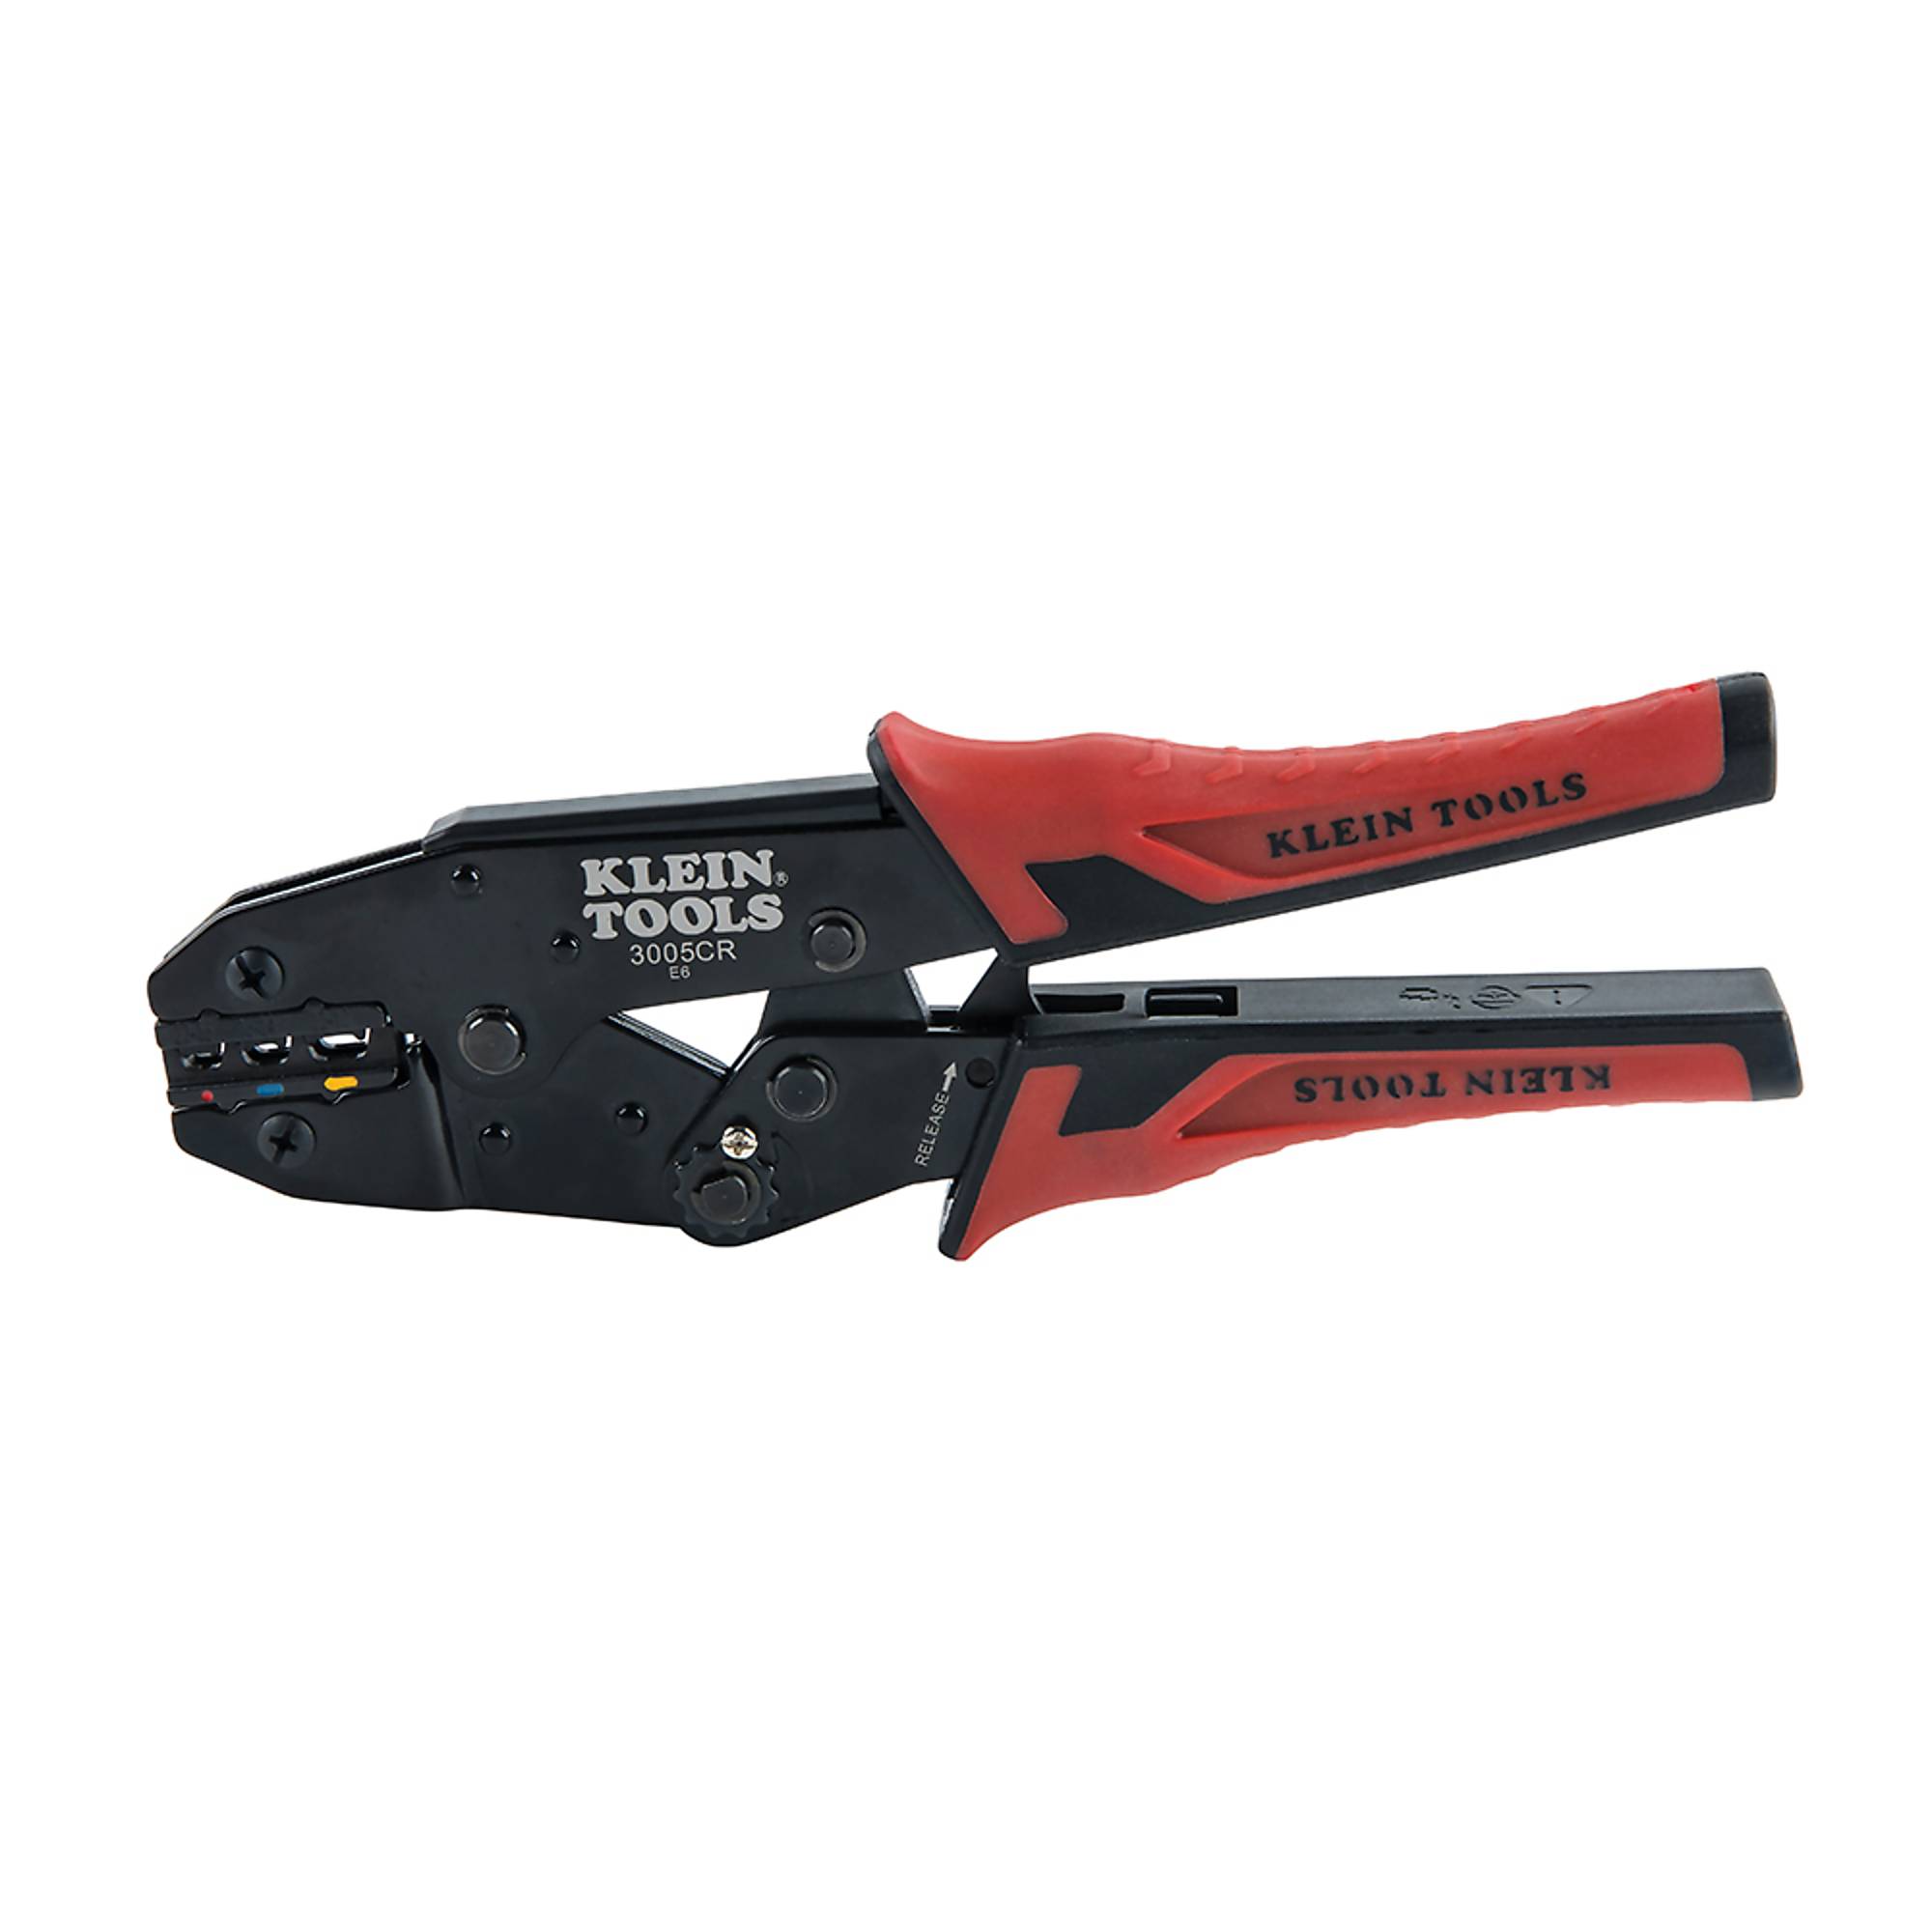 Klein Tools, Ratcheting Crimper, 10-22 AWG Insulated Terminals, Model 3005CR